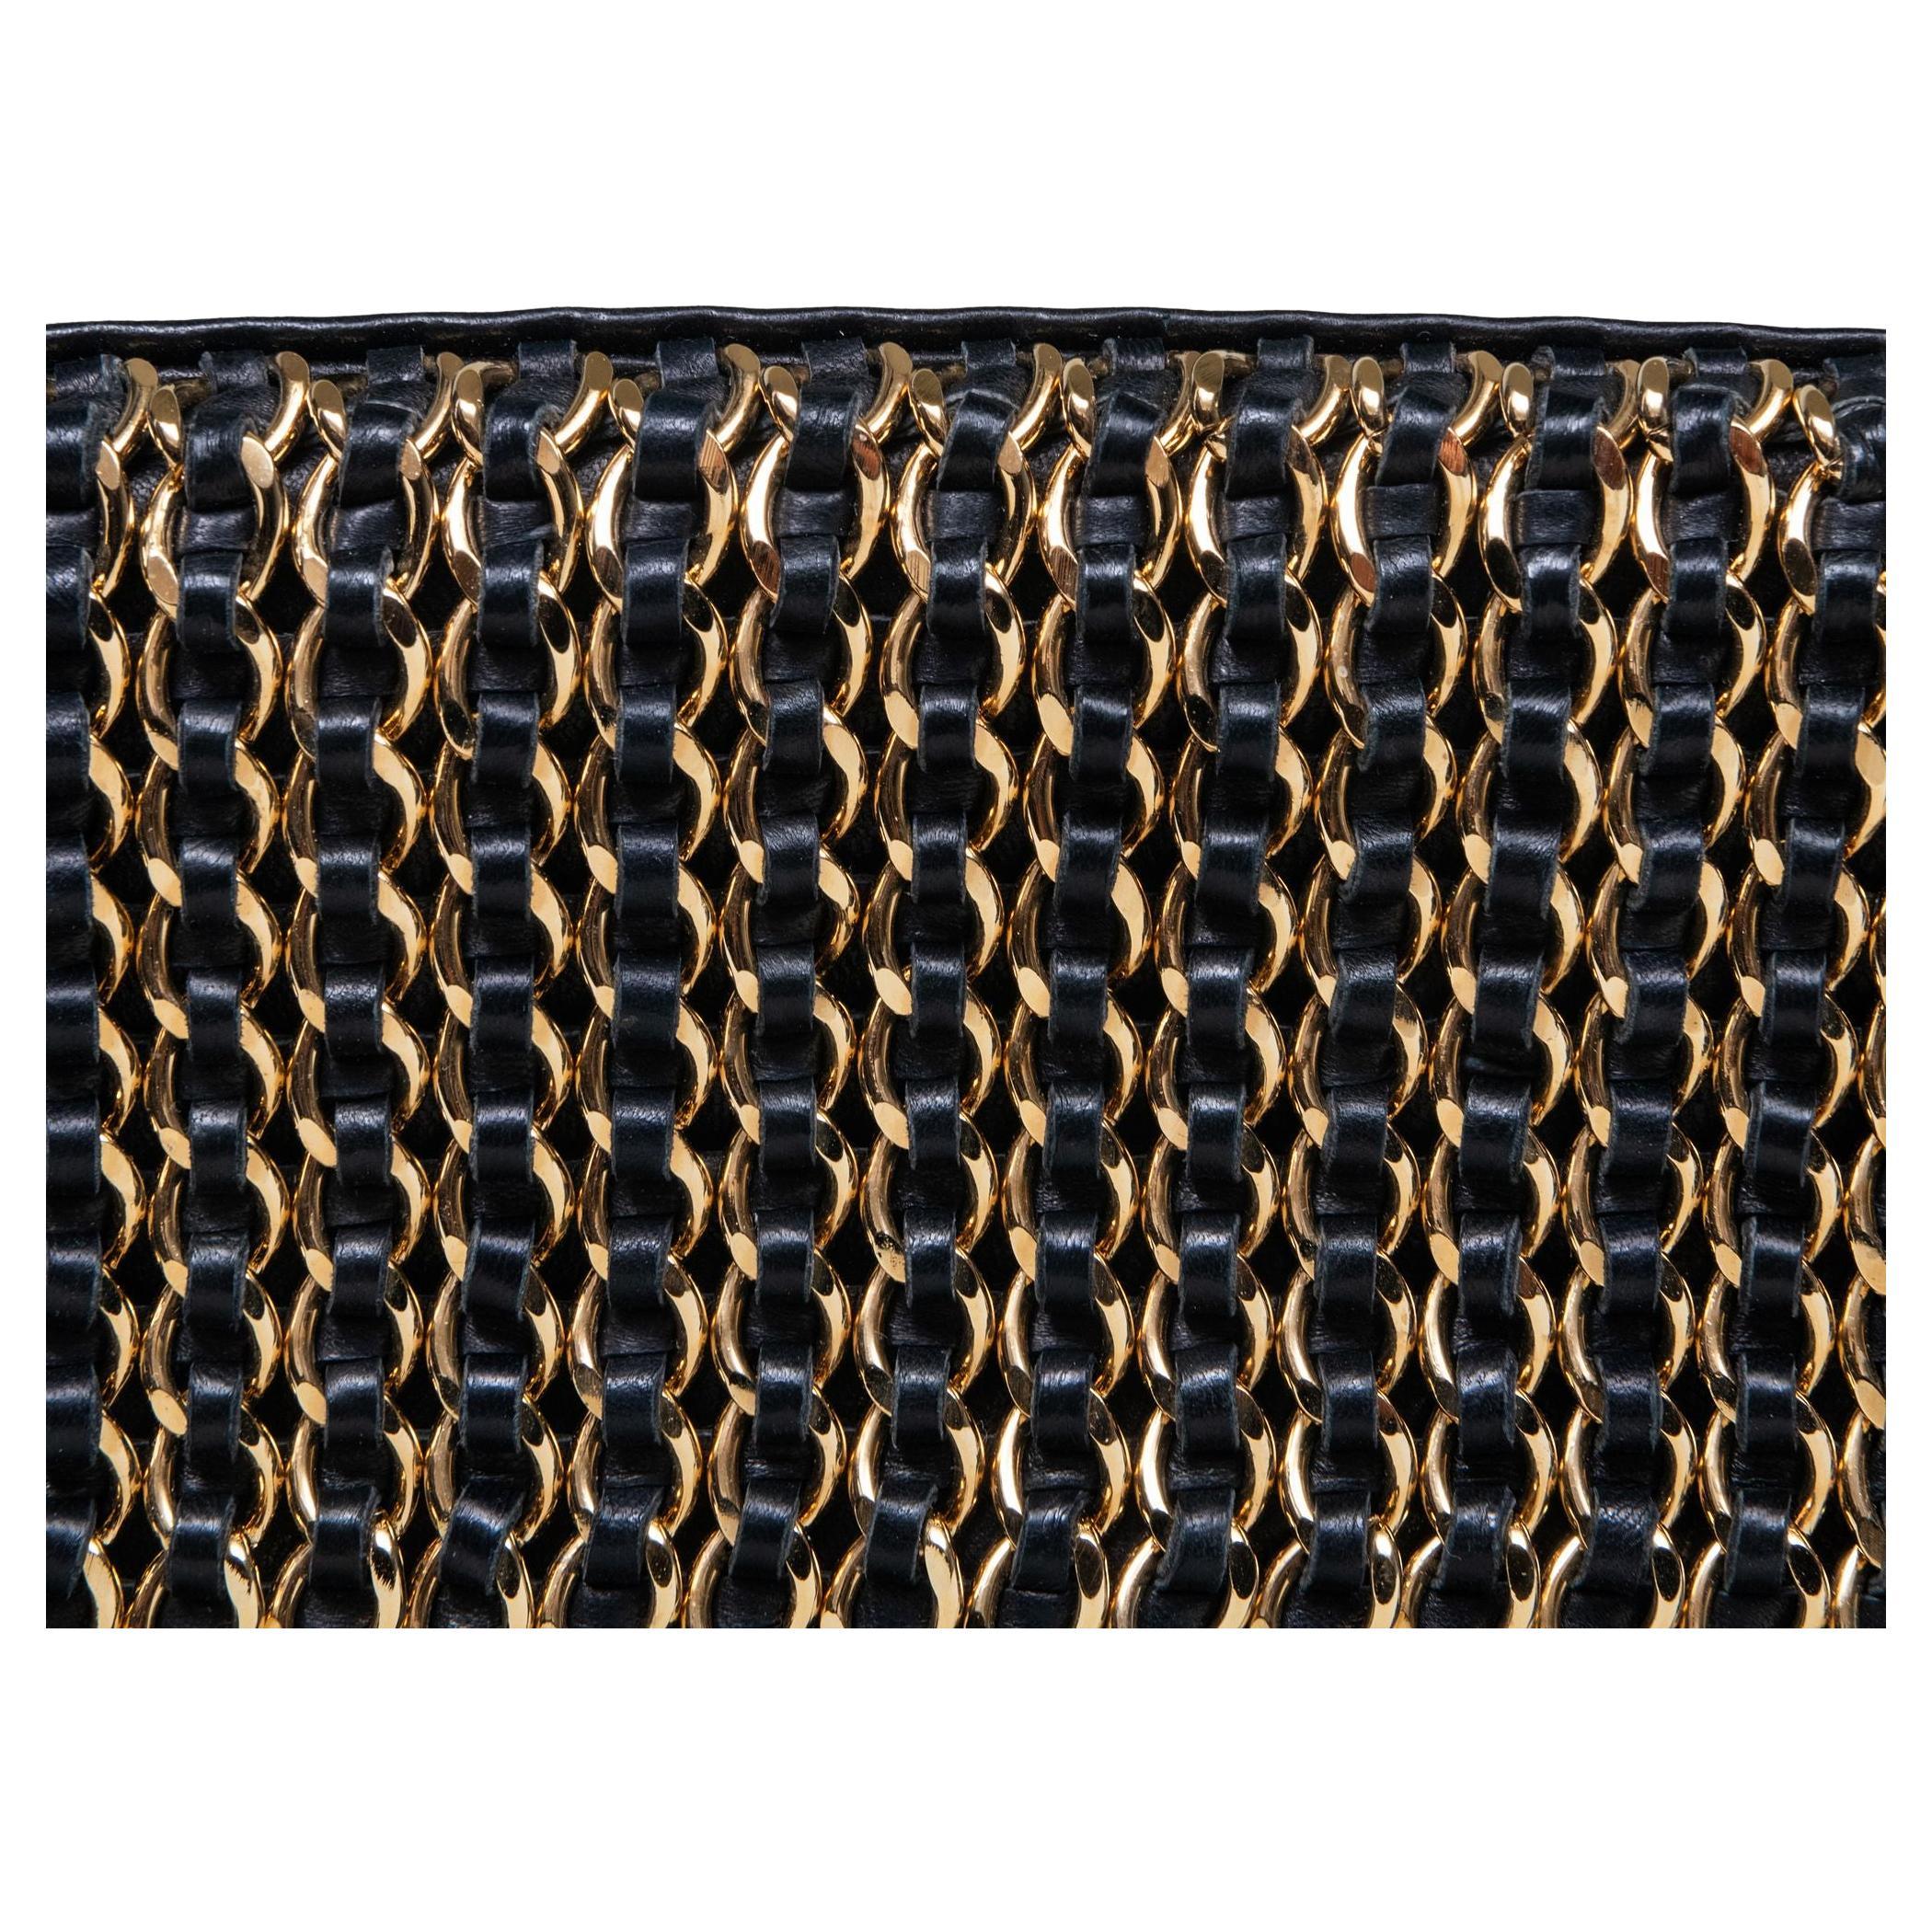 Chanel Vintage Black Lambskin Chain-Embellished Clutch Flap Bag

Year: 2003-2004 {Vintage 20 Years}

Gold hardware
Dual gathered shoulder strap with knot accent
Chanel embellished chain-link accents at flap
Tonal logo jacquard lining 
Snap closure